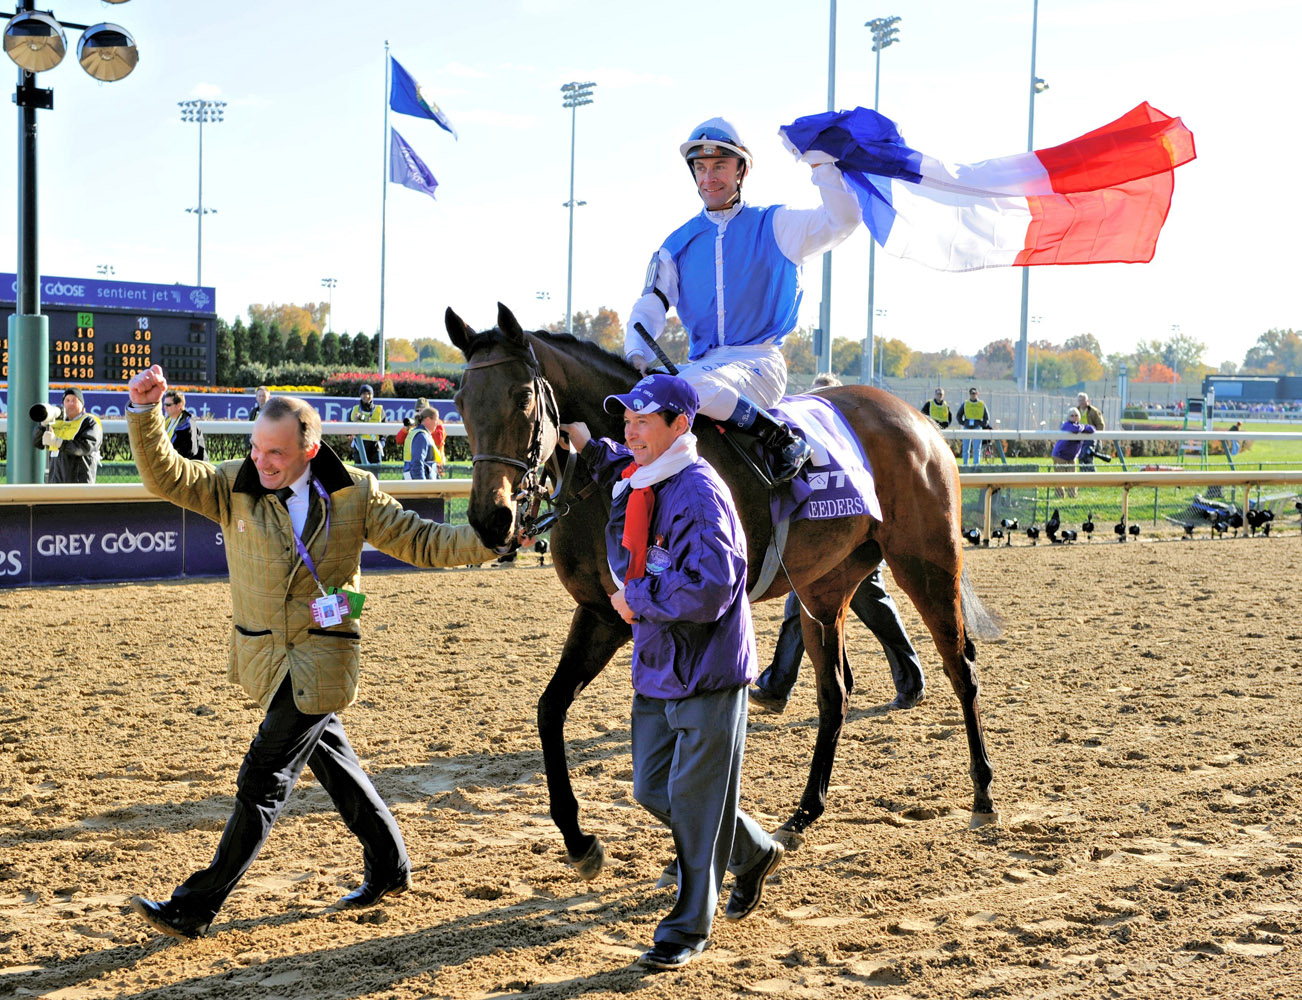 Goldikova and her connections celebrate her third consecutive Breeders' Cup Mile victory at Churchill Downs in November 2010 (Breeders' Cup Photo)